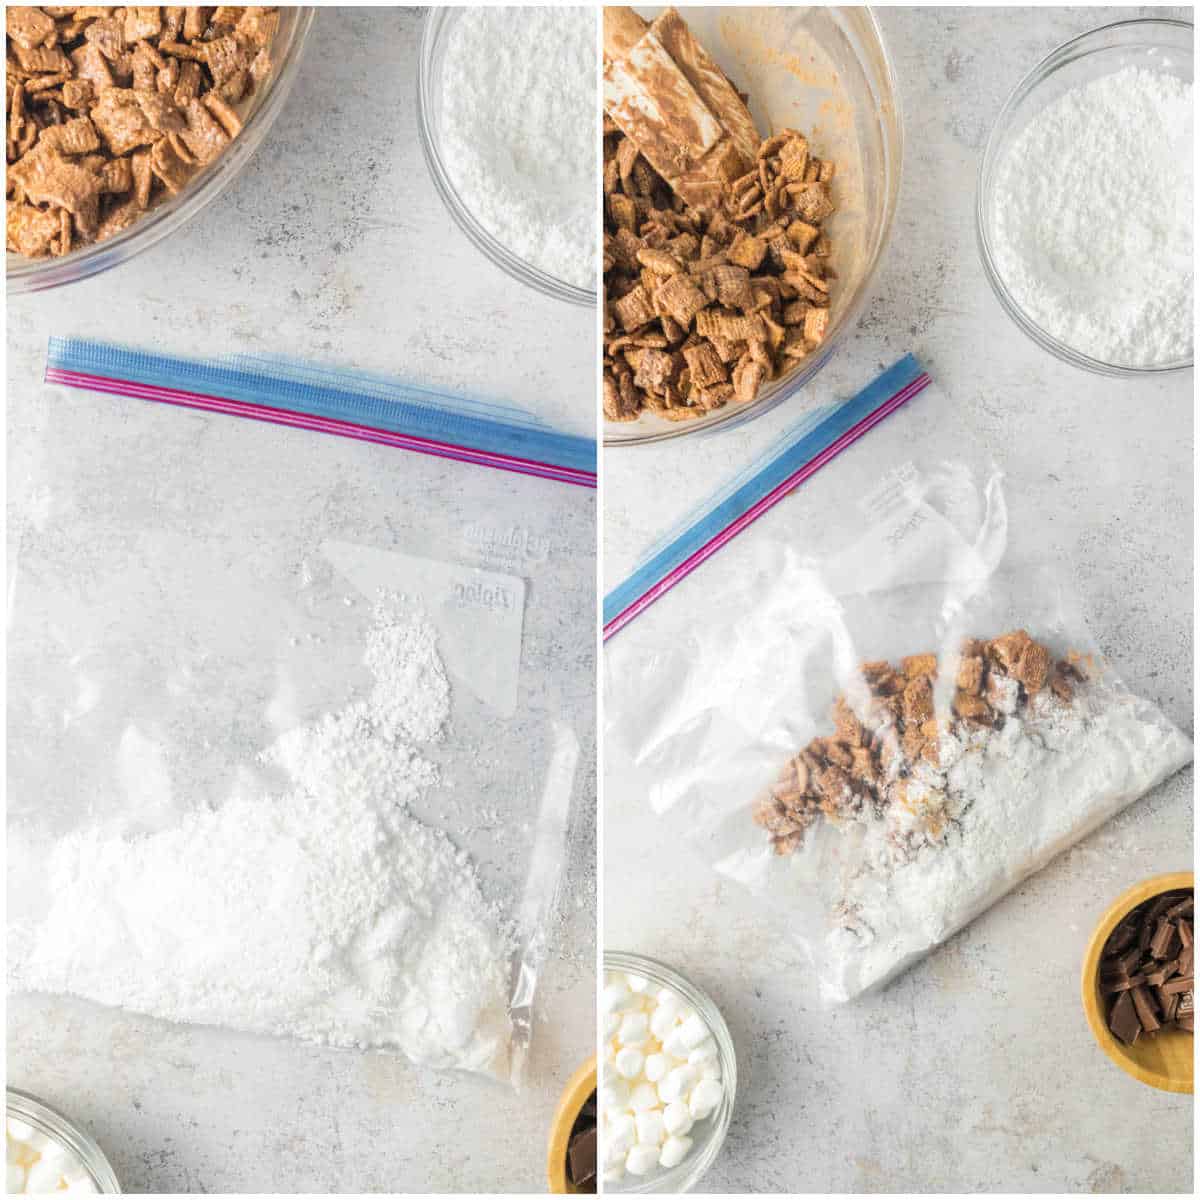 Steps to make s'mores puppy chow.